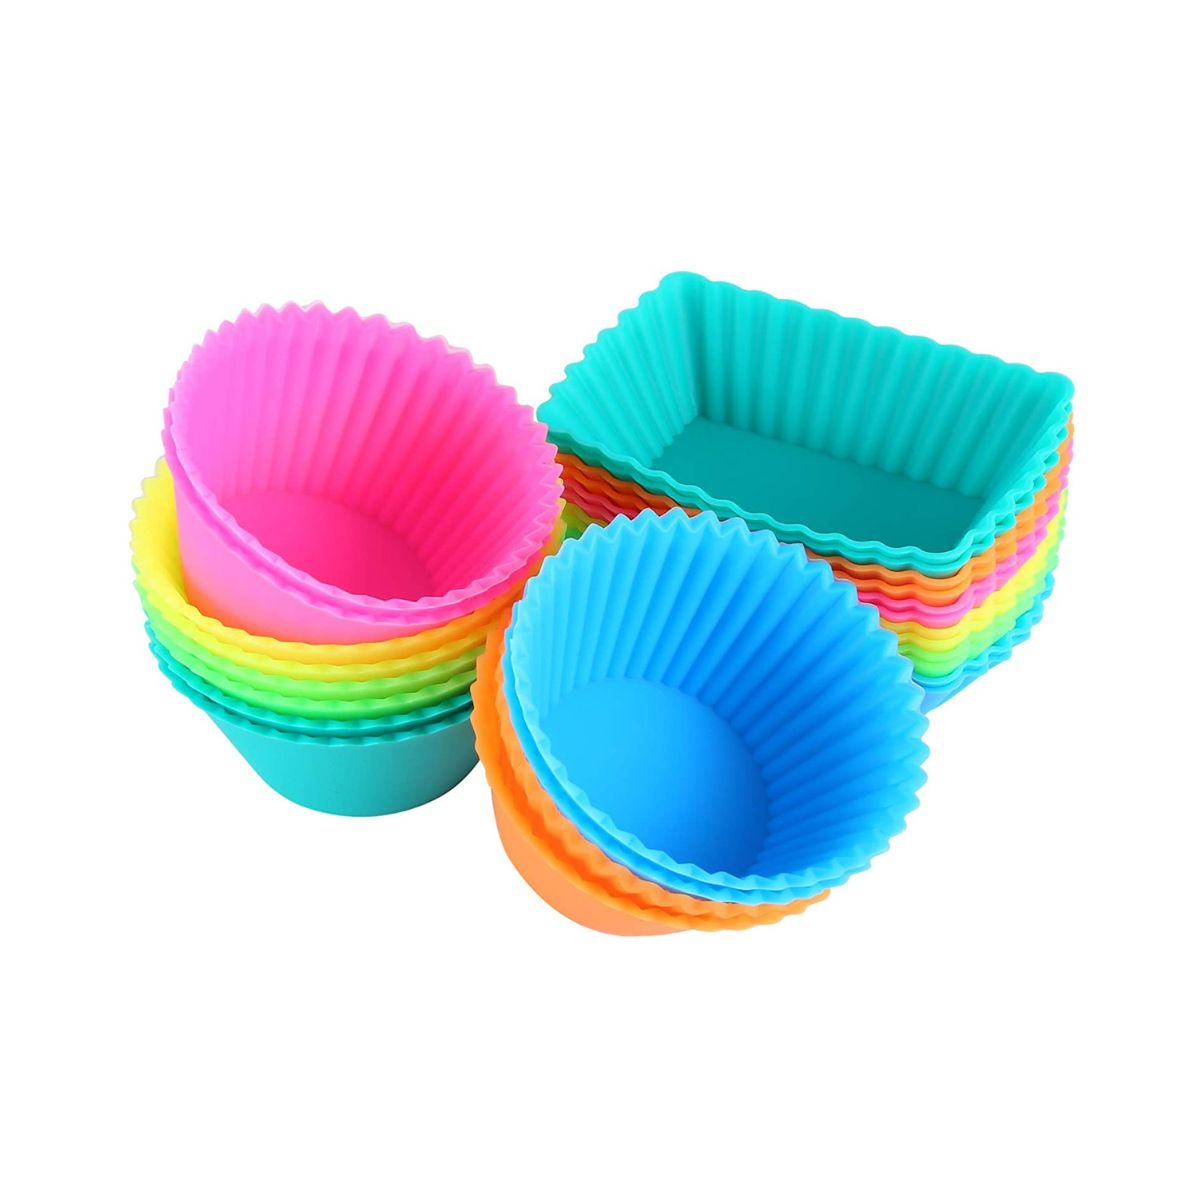 brightly colored silicone baking cups